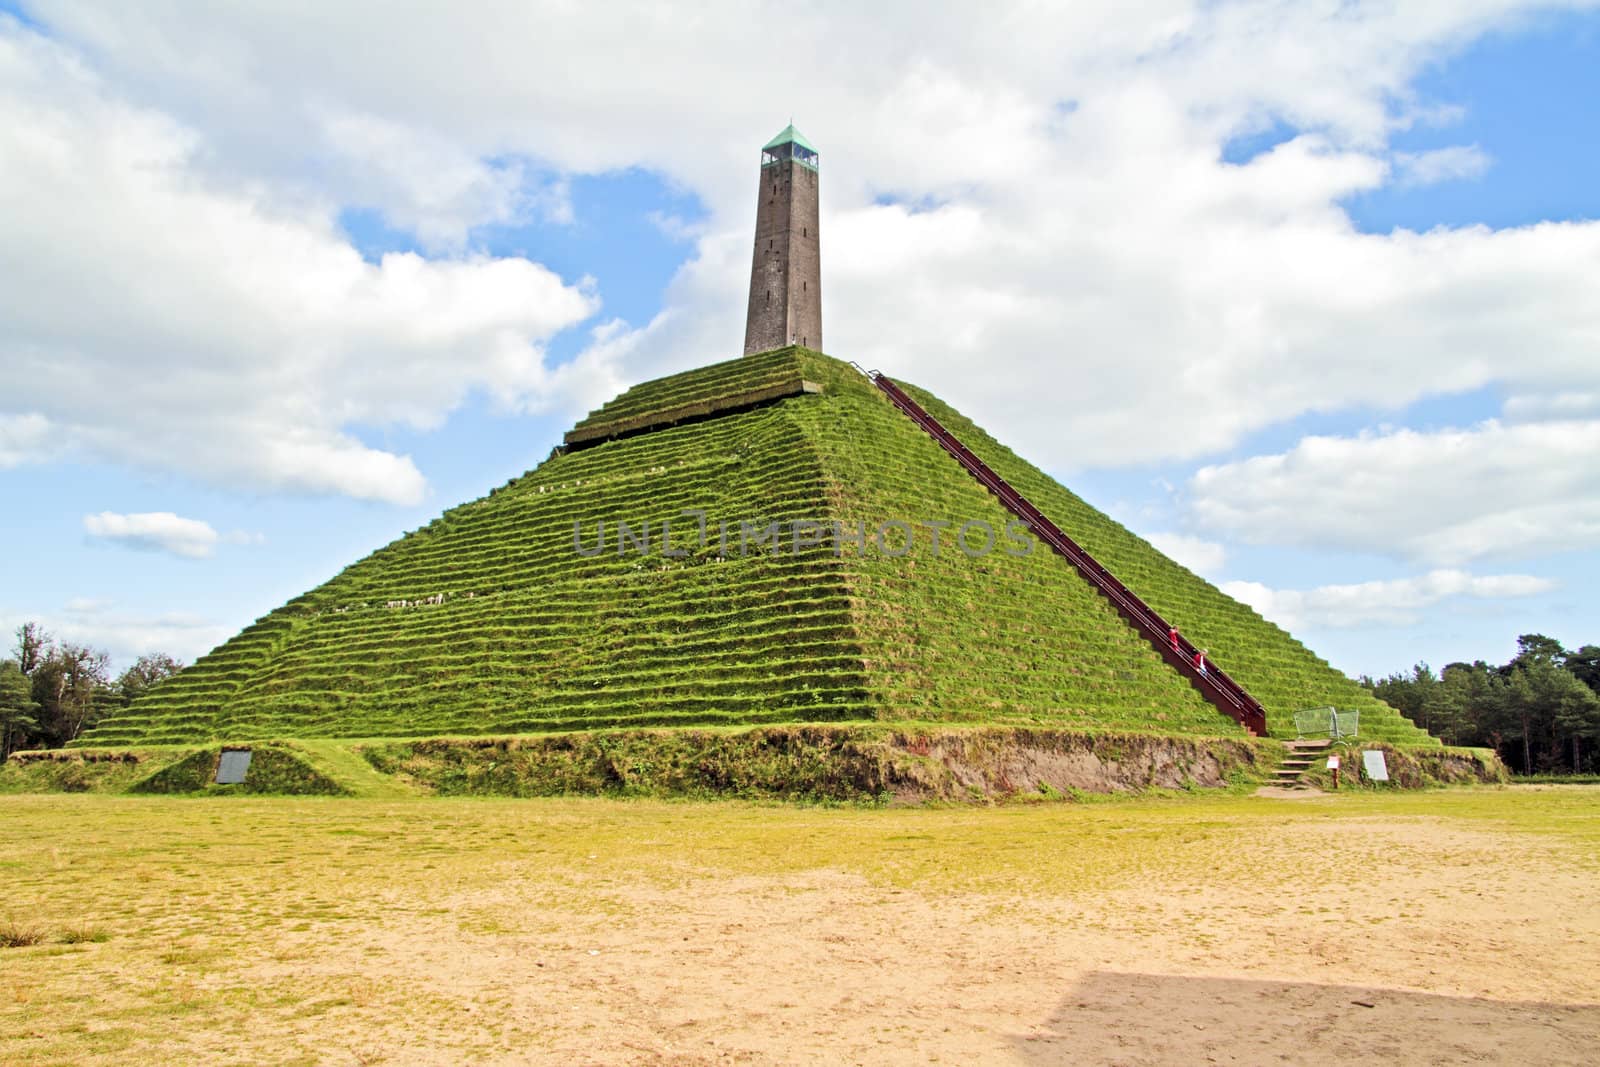 Pyramid from Austerlitz built in 1804 in the Netherlands